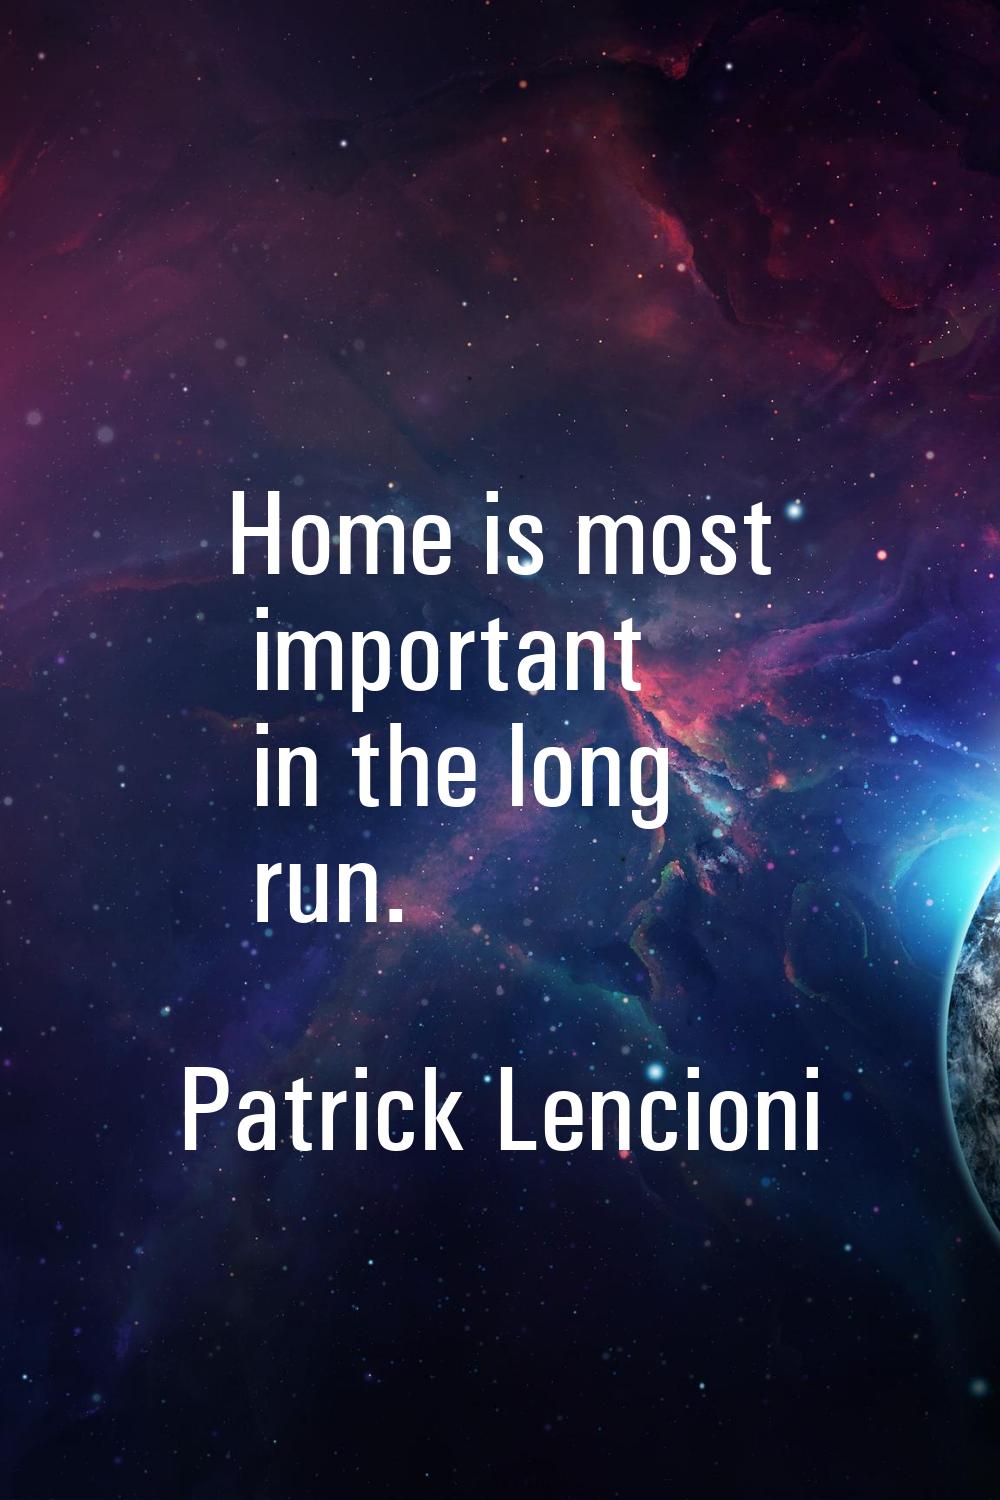 Home is most important in the long run.